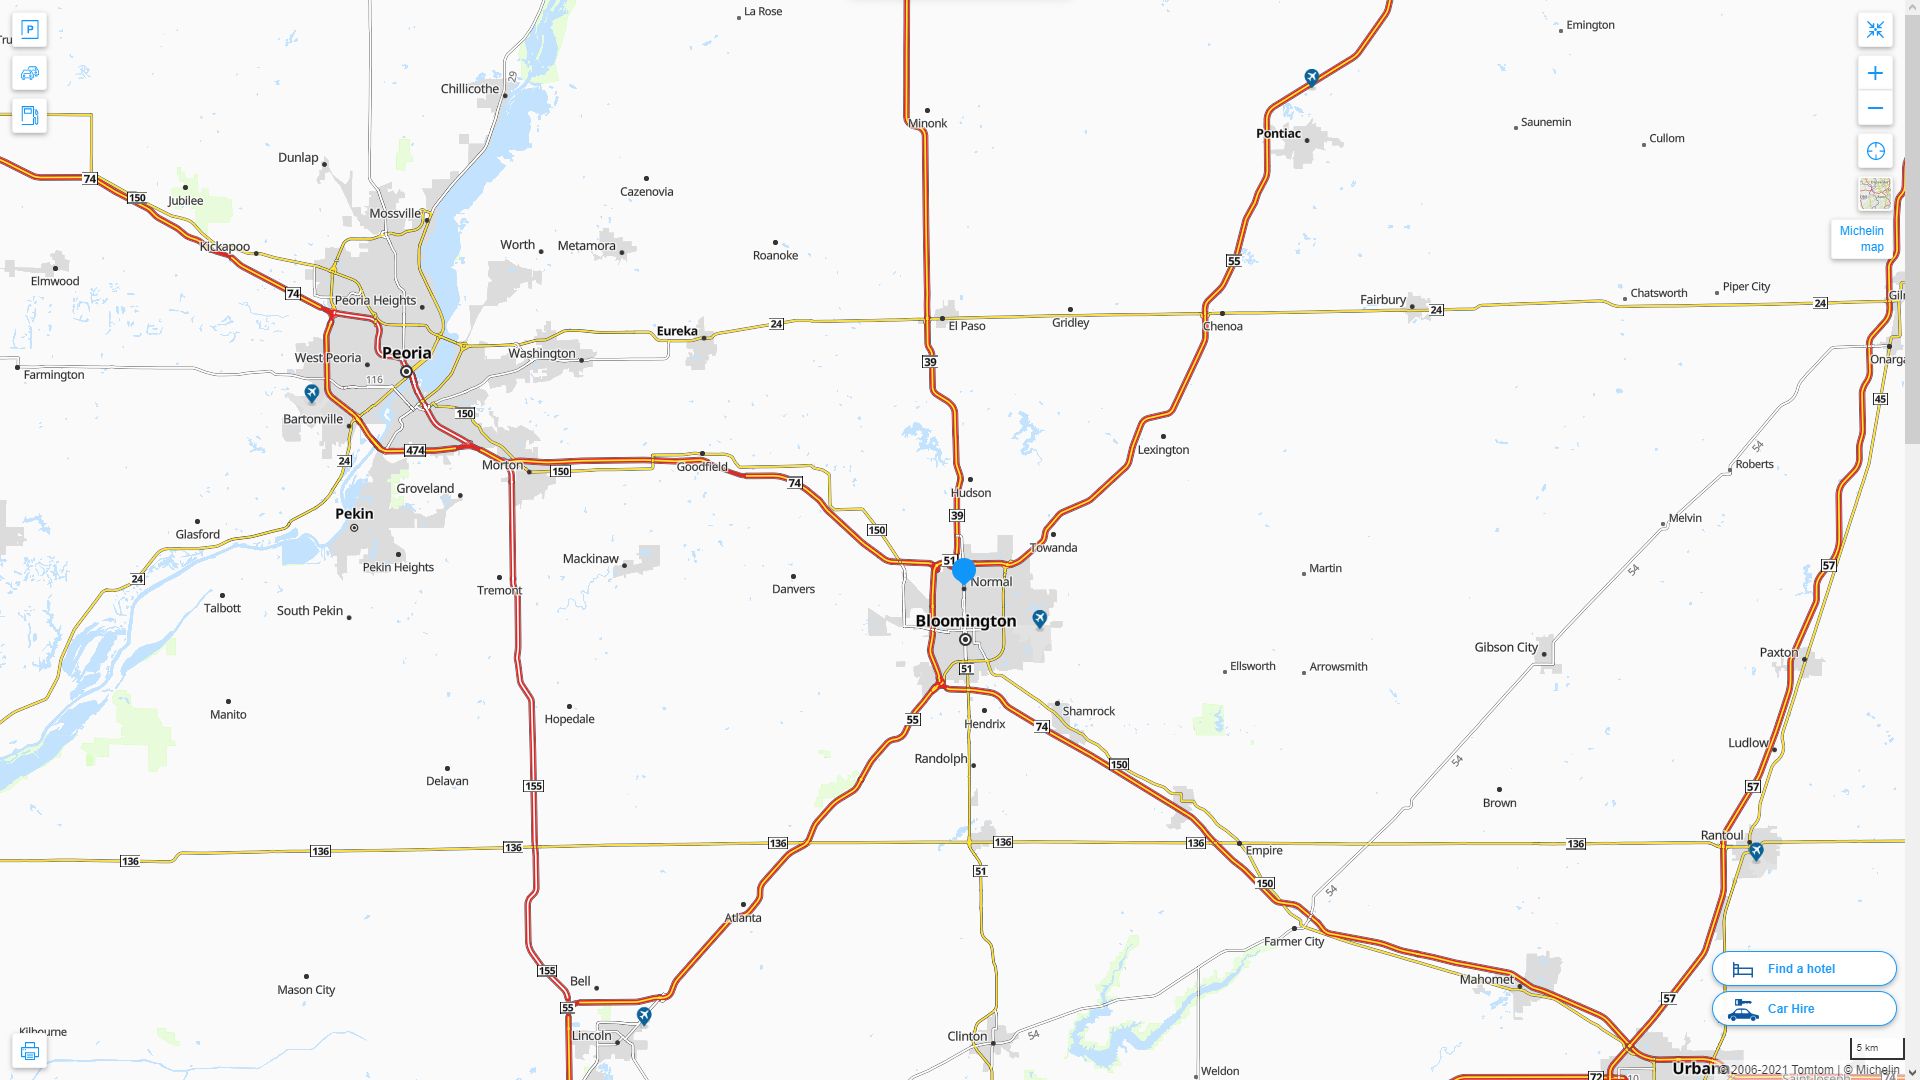 Normal illinois Highway and Road Map